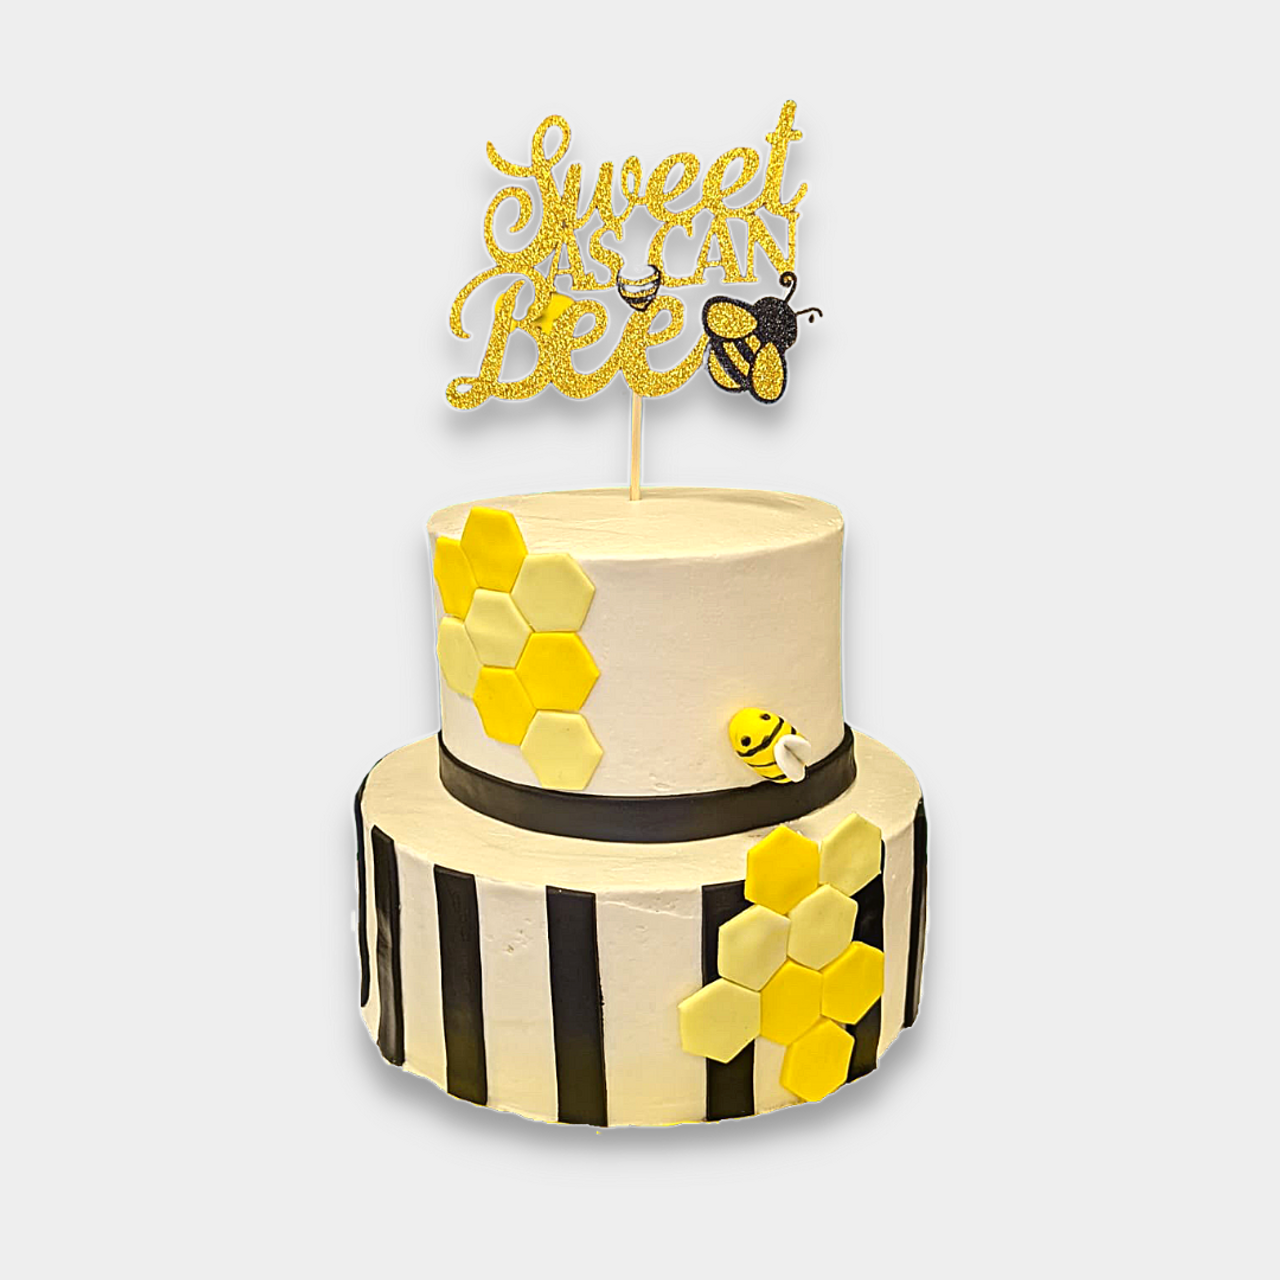 Cute Sunflower & Bees Flowers Cake, A Customize Flowers cake